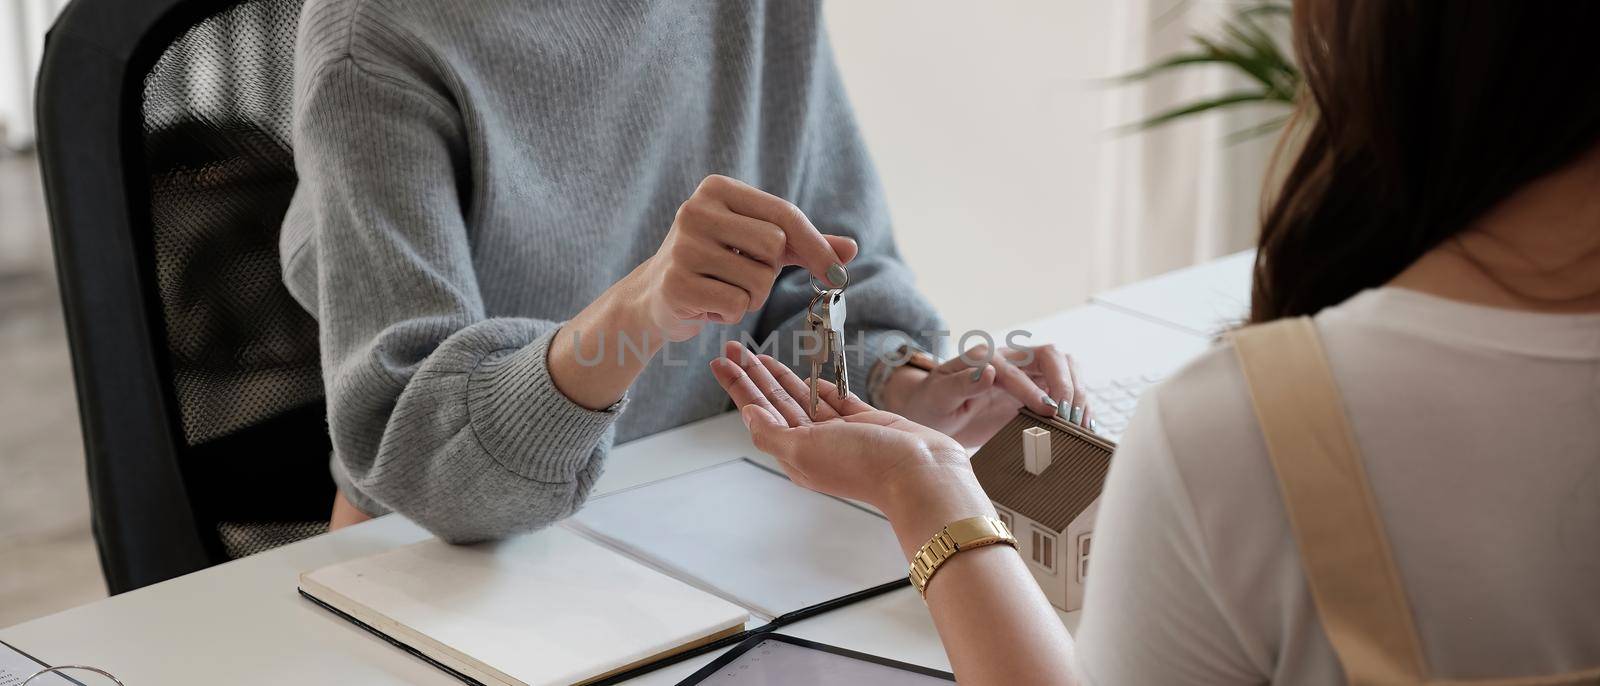 real estate agent holding house key to his client after signing contract agreement in office,concept for real estate, moving home or renting property by nateemee